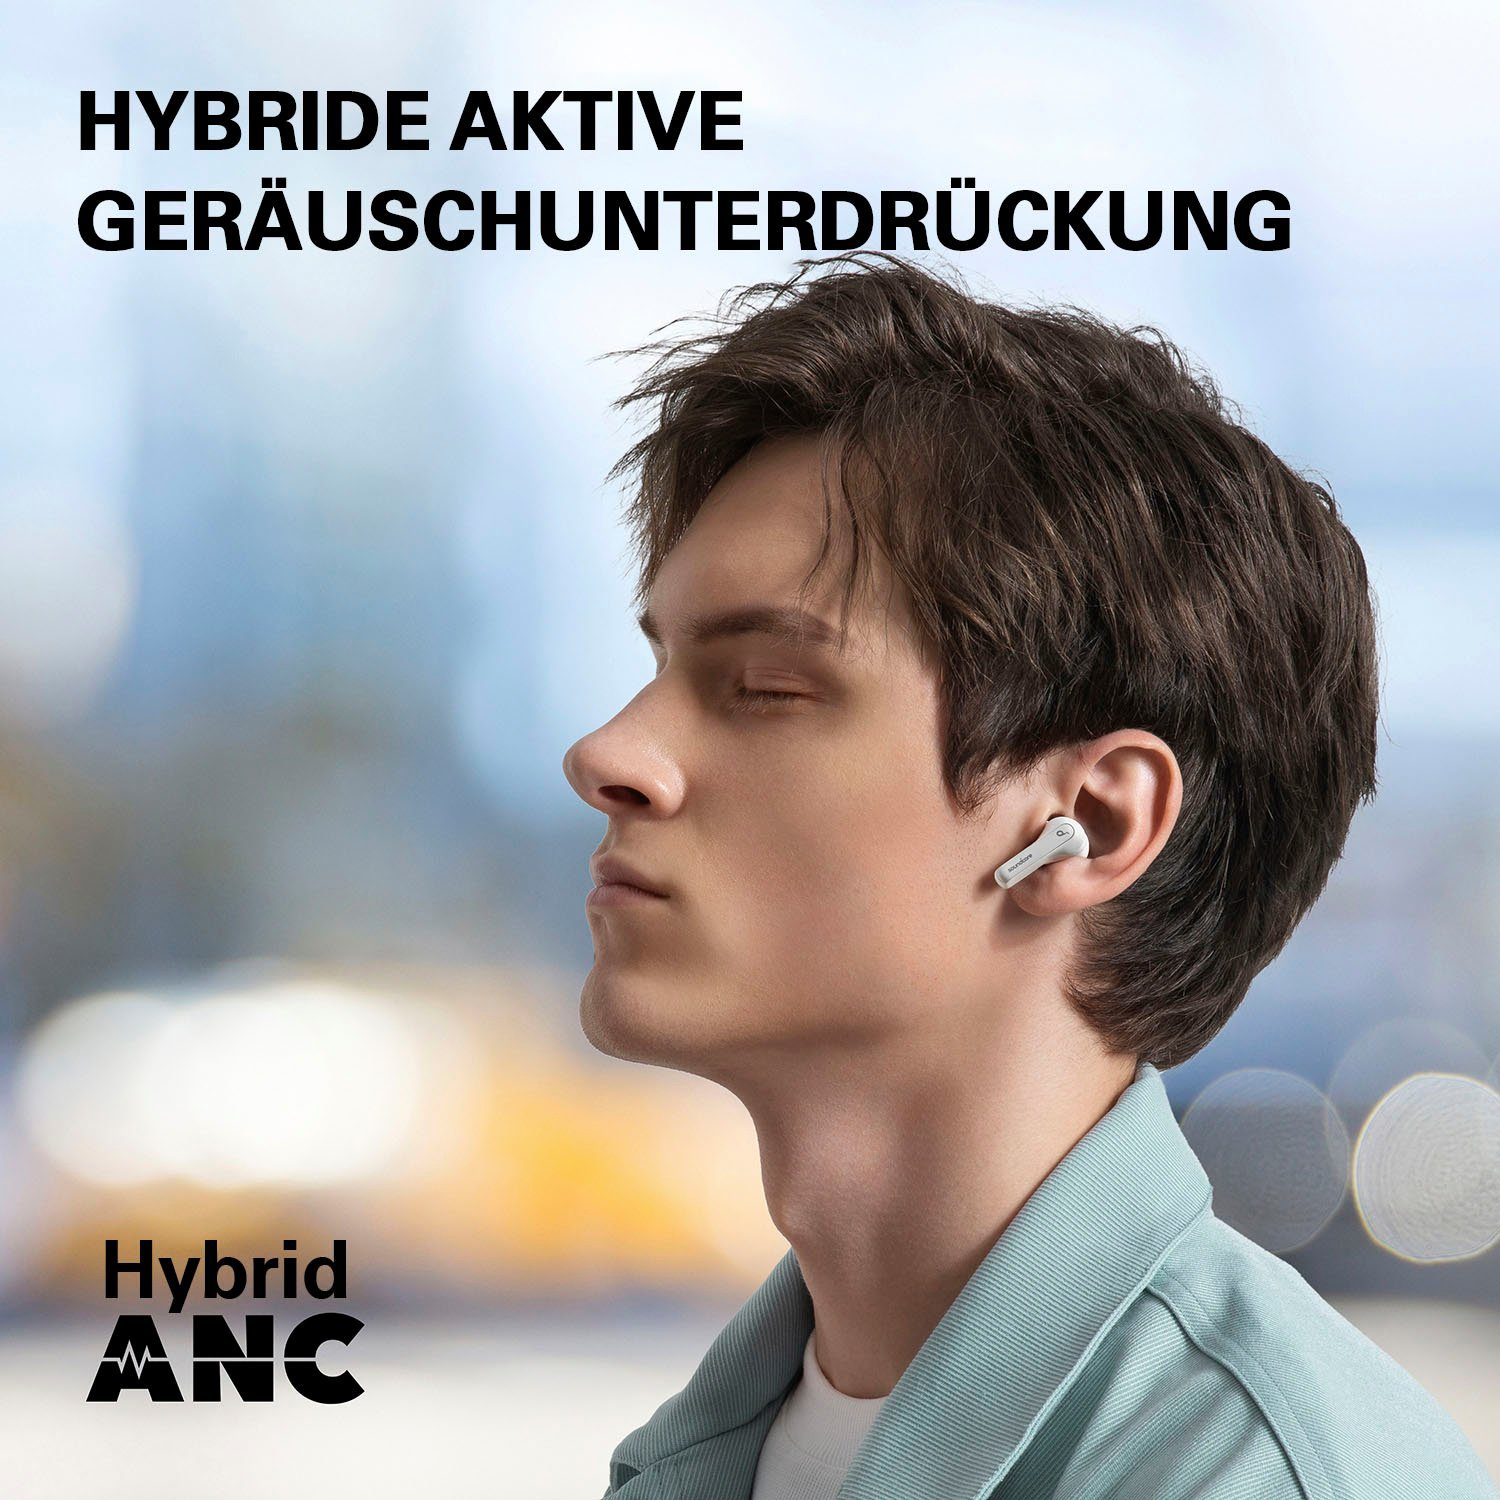 Anker SOUNDCORE Note 3i Headset Transparenzmodus, (ANC), Rauschunterdrückung, (Active Freisprechfunktion, HFP) Noise Cancelling Bluetooth, White